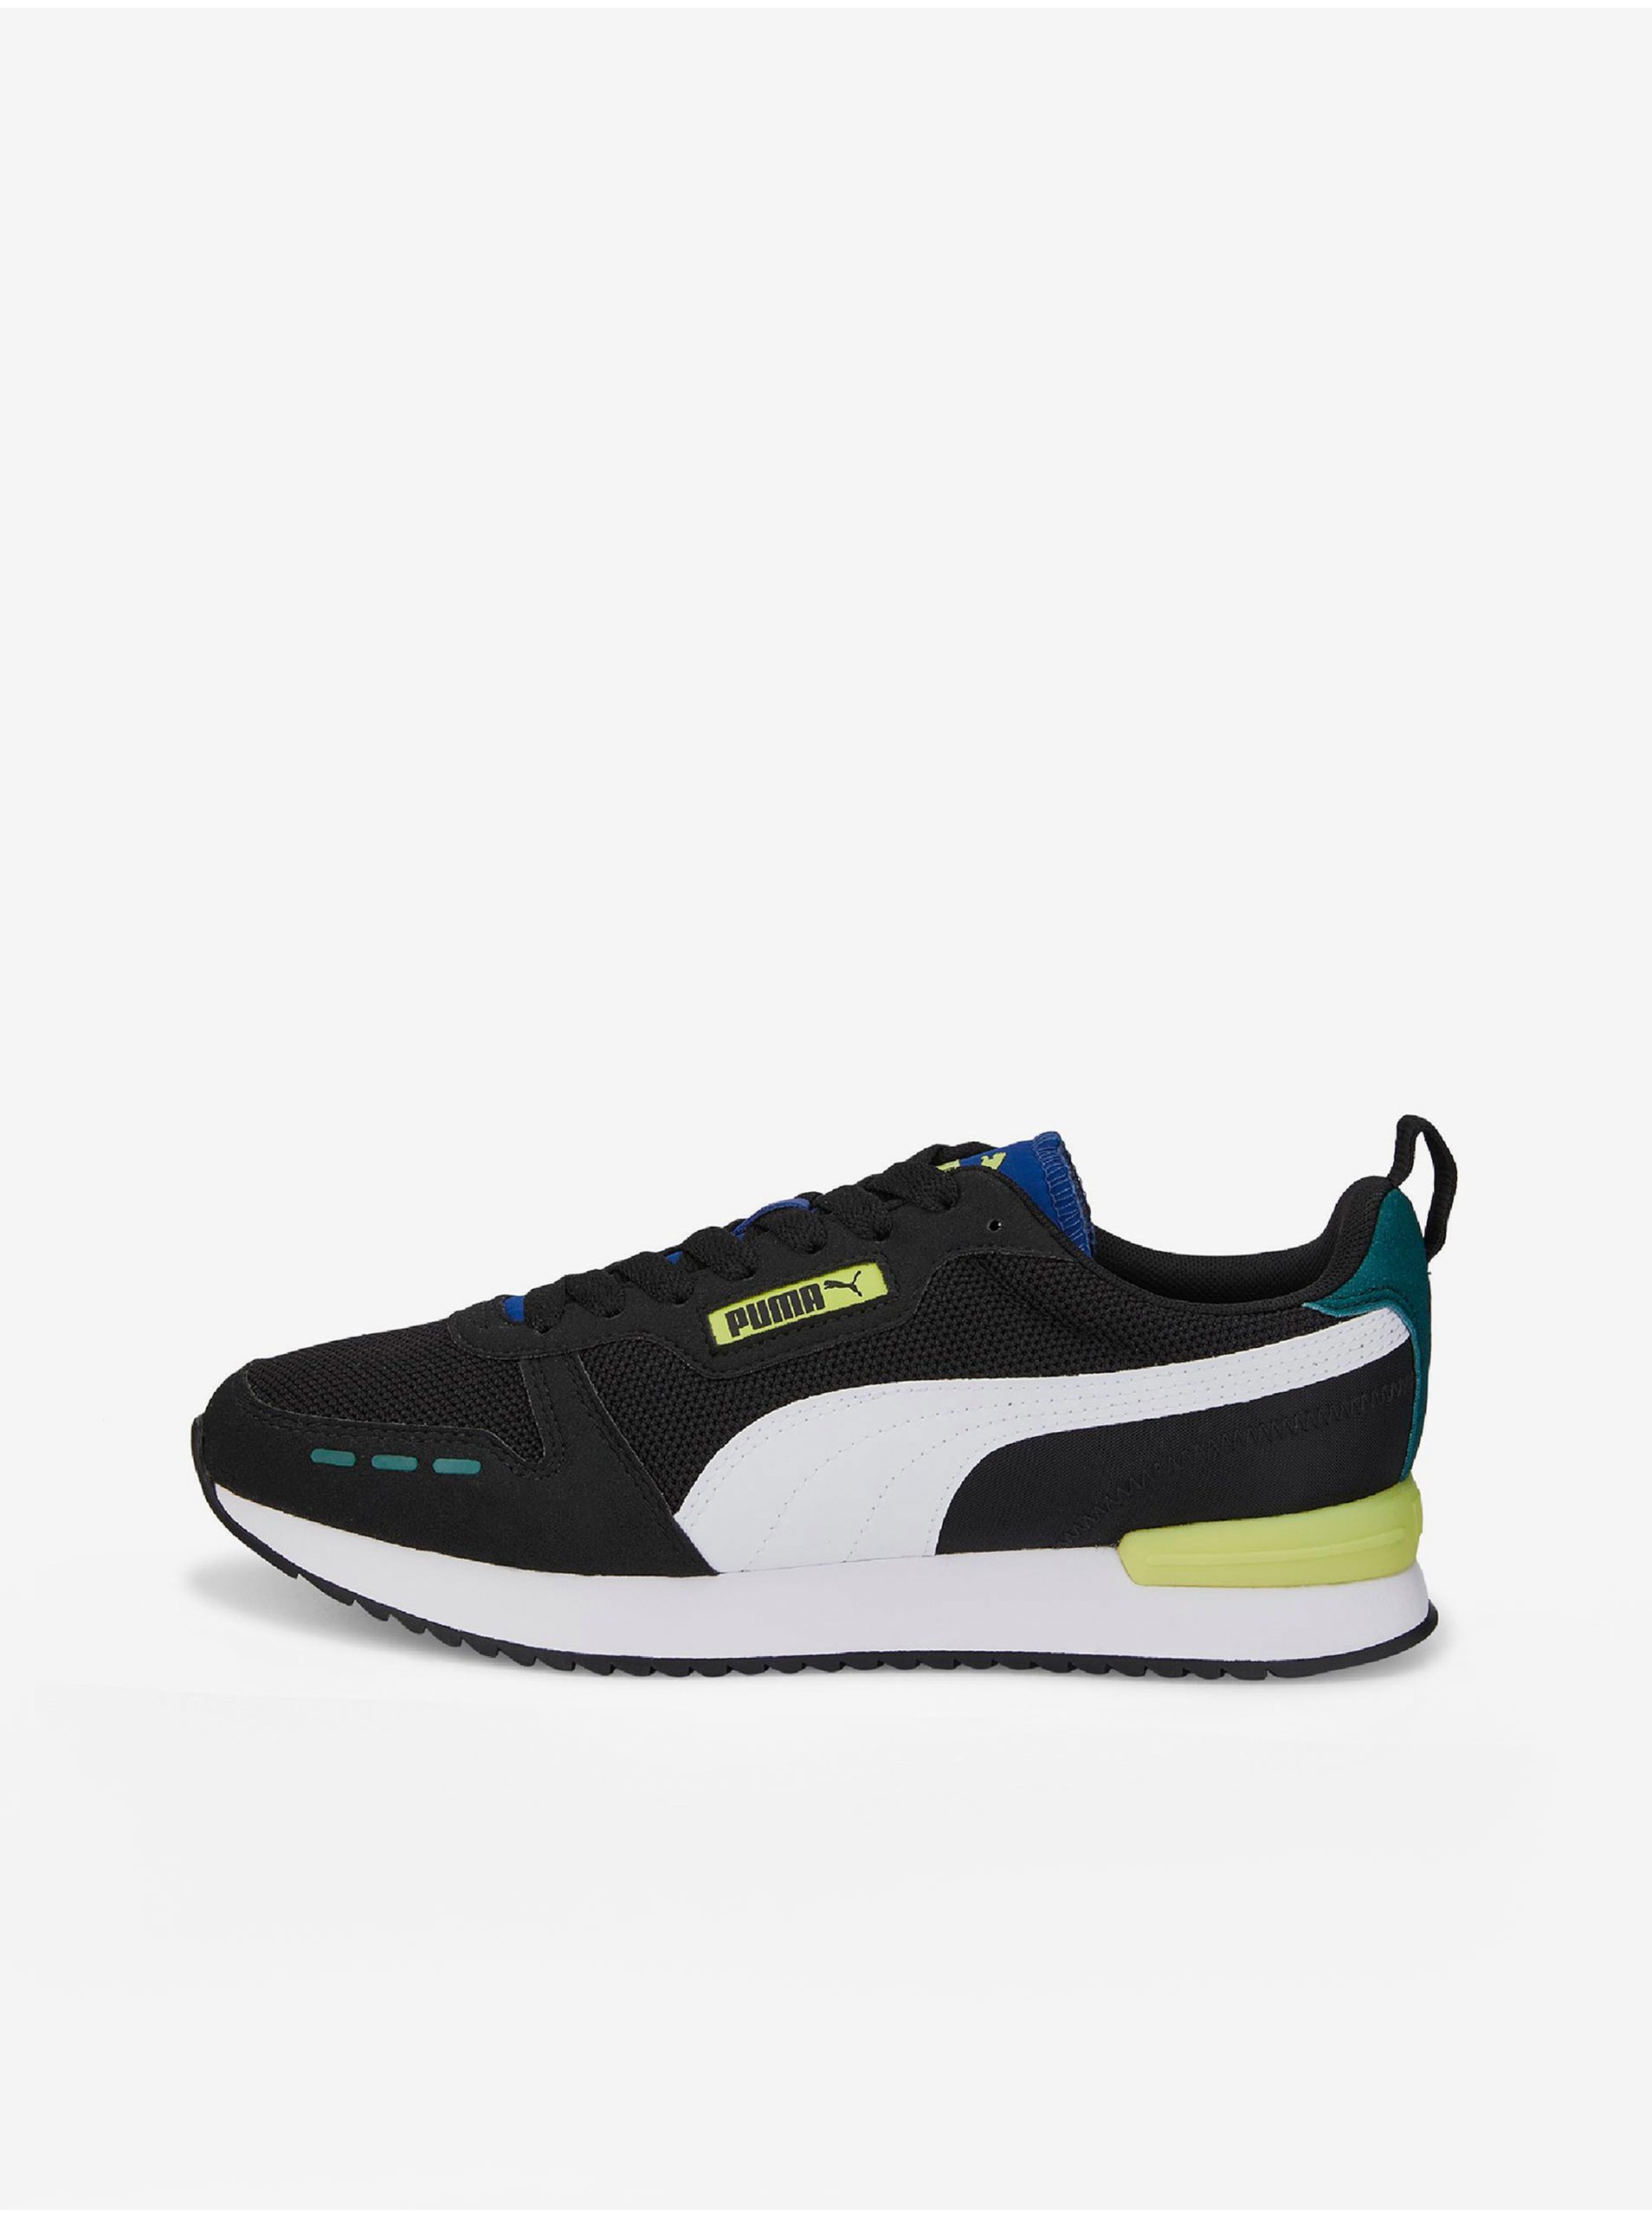 White And Black Sneakers With Suede Details Puma R78 - Men's